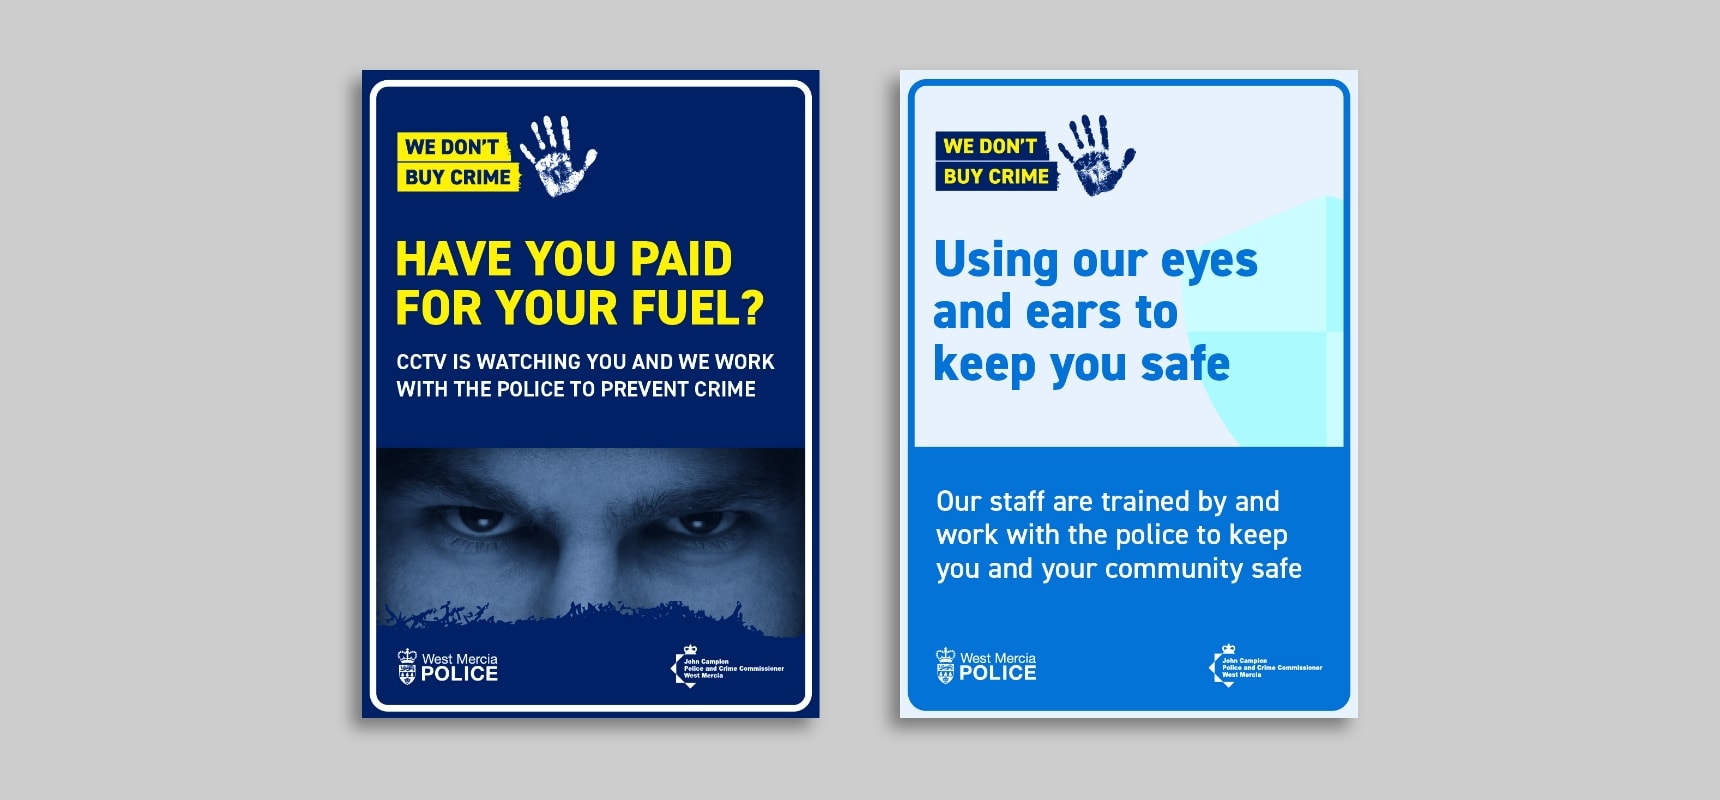 We Don't Buy Crime Poster design showing the previous design on the right